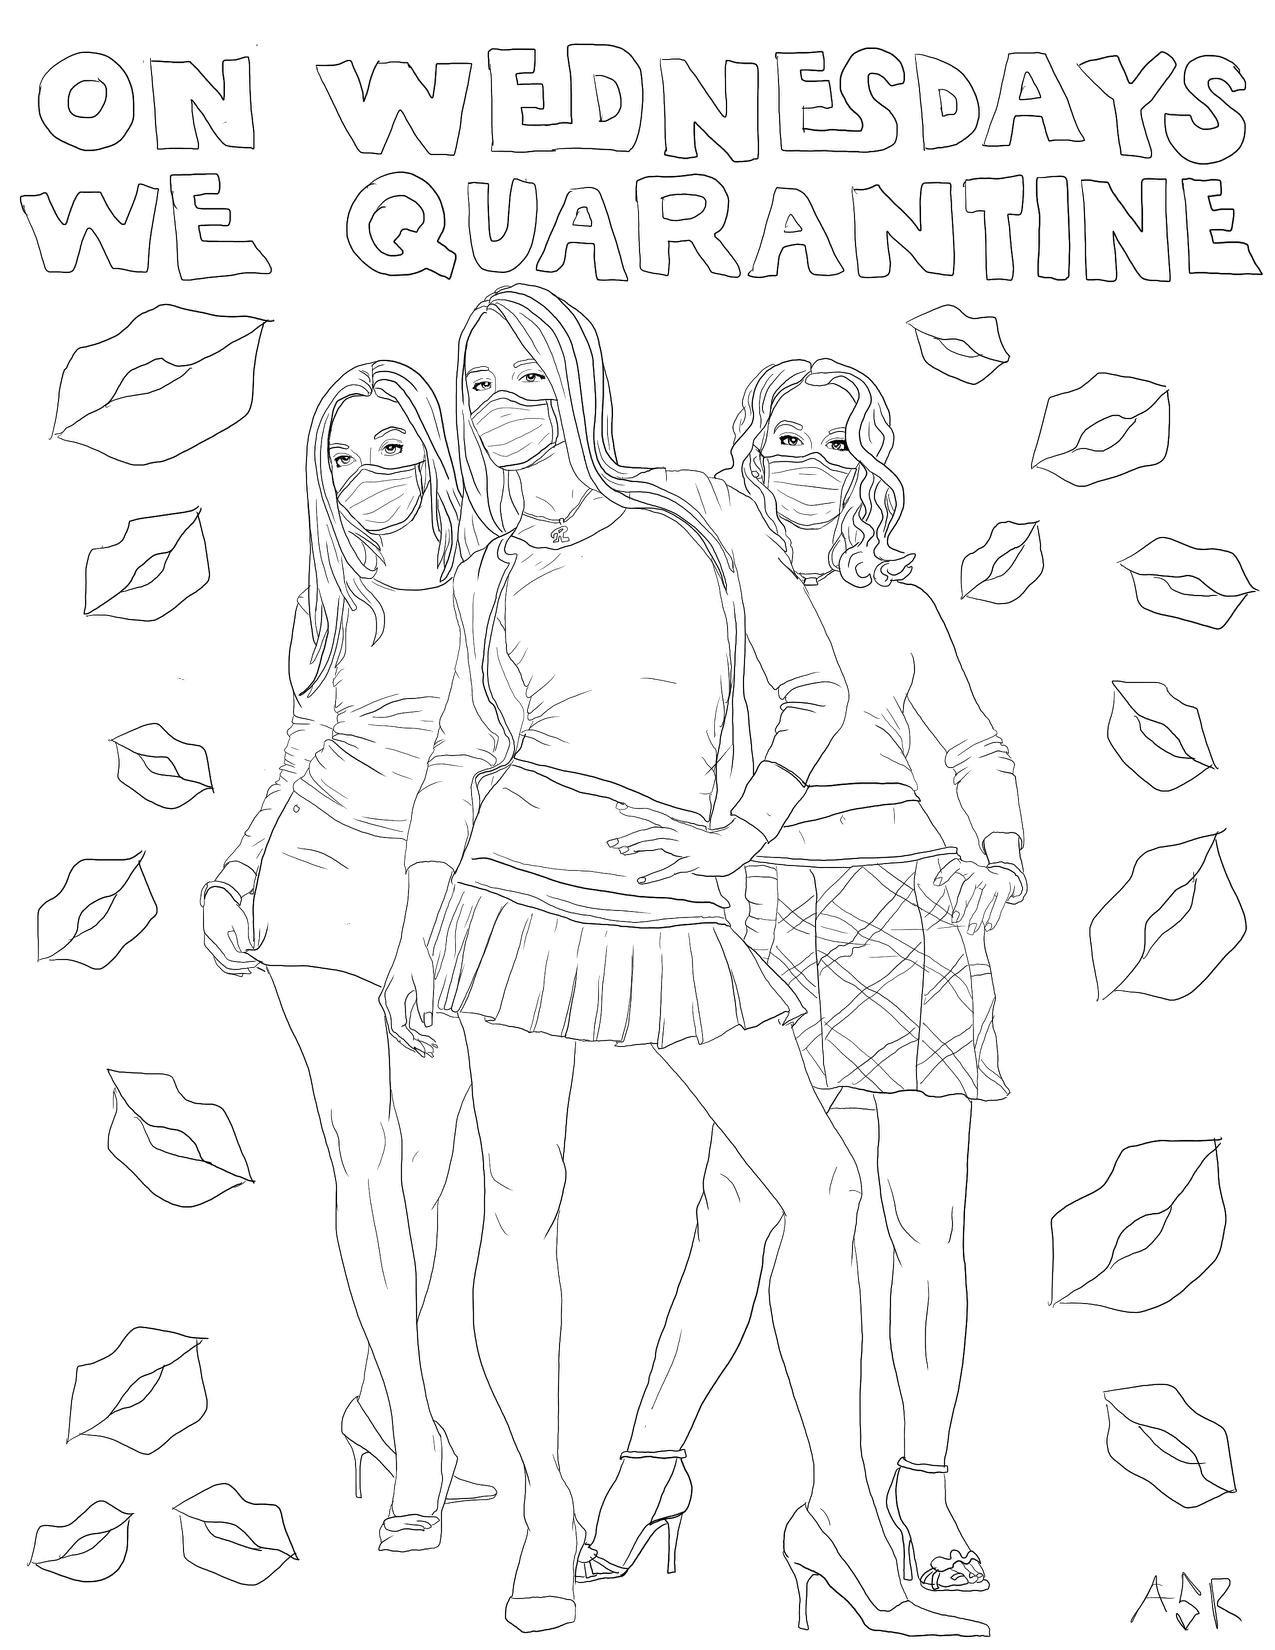 Printable Coloring Sheets Instant Download Hand-Drawn Quarantine Coloring Pages- Set of 2 Classroom Fun